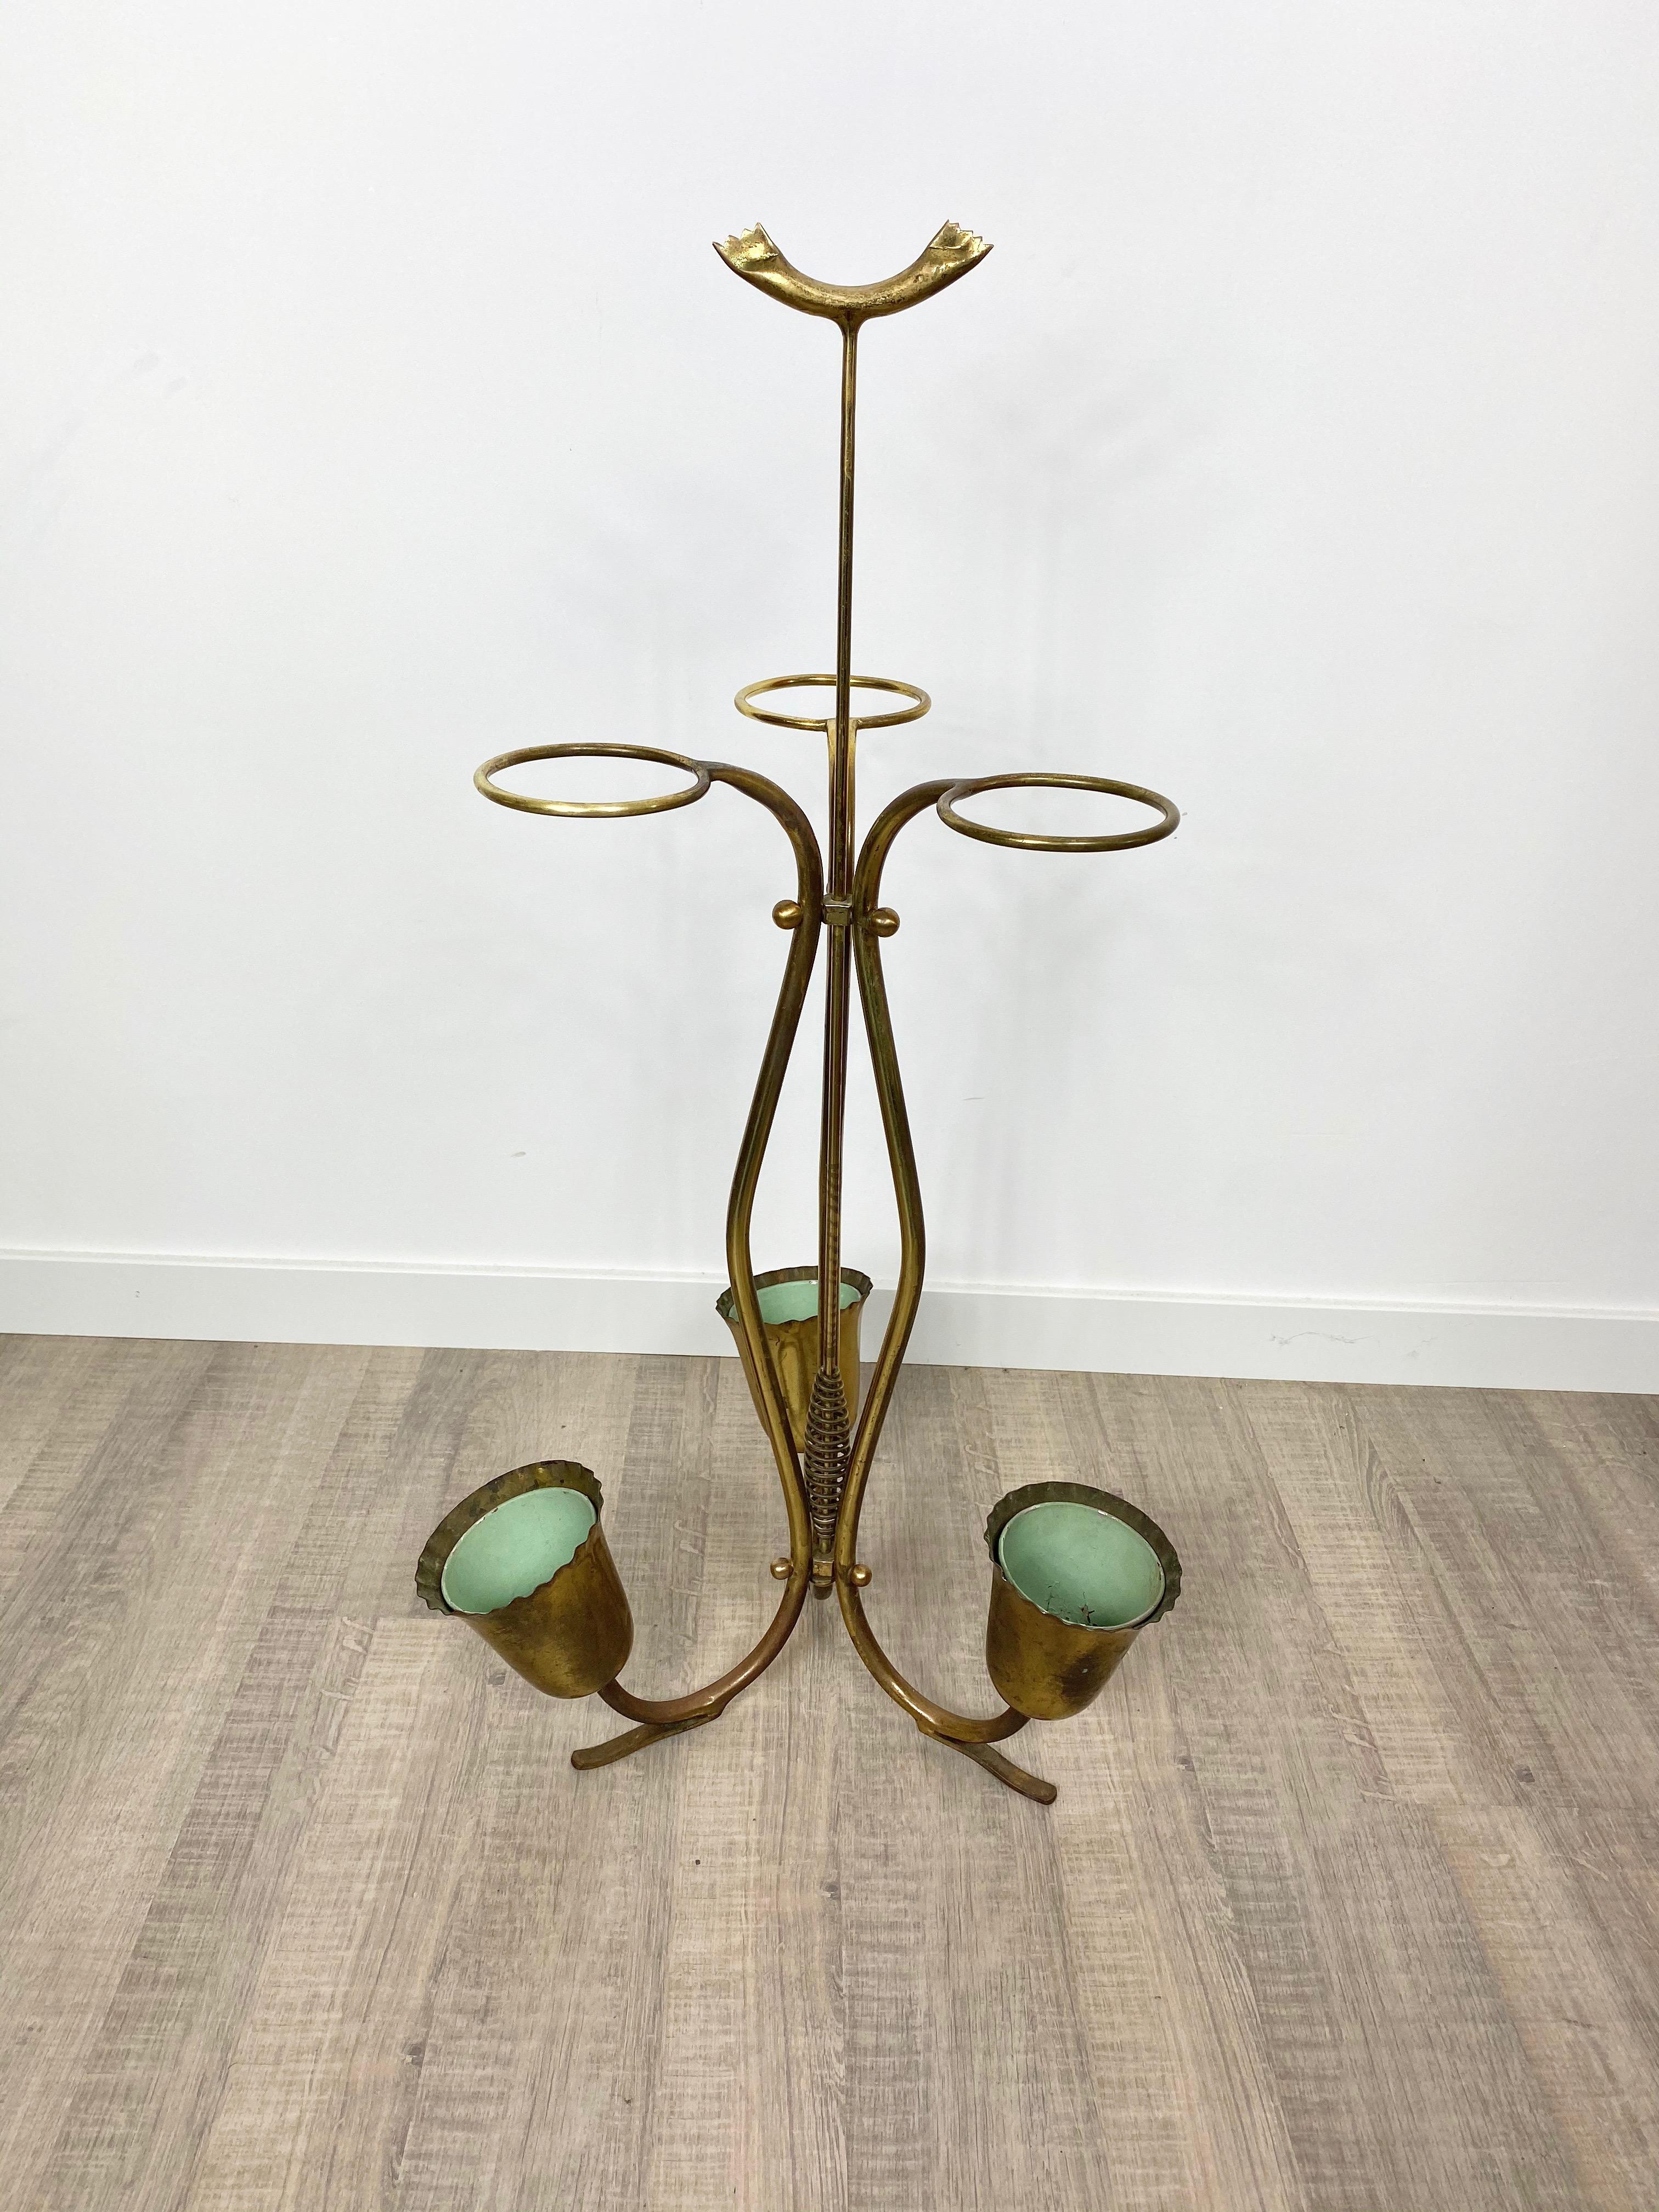 An elegant umbrella stand made in brass by the Italian designer Osvaldo Borsani from the 1950s. Structure with three legs, with small cups in the part below and brass empty circle not only aesthetical but also functional to insert the umbrellas.